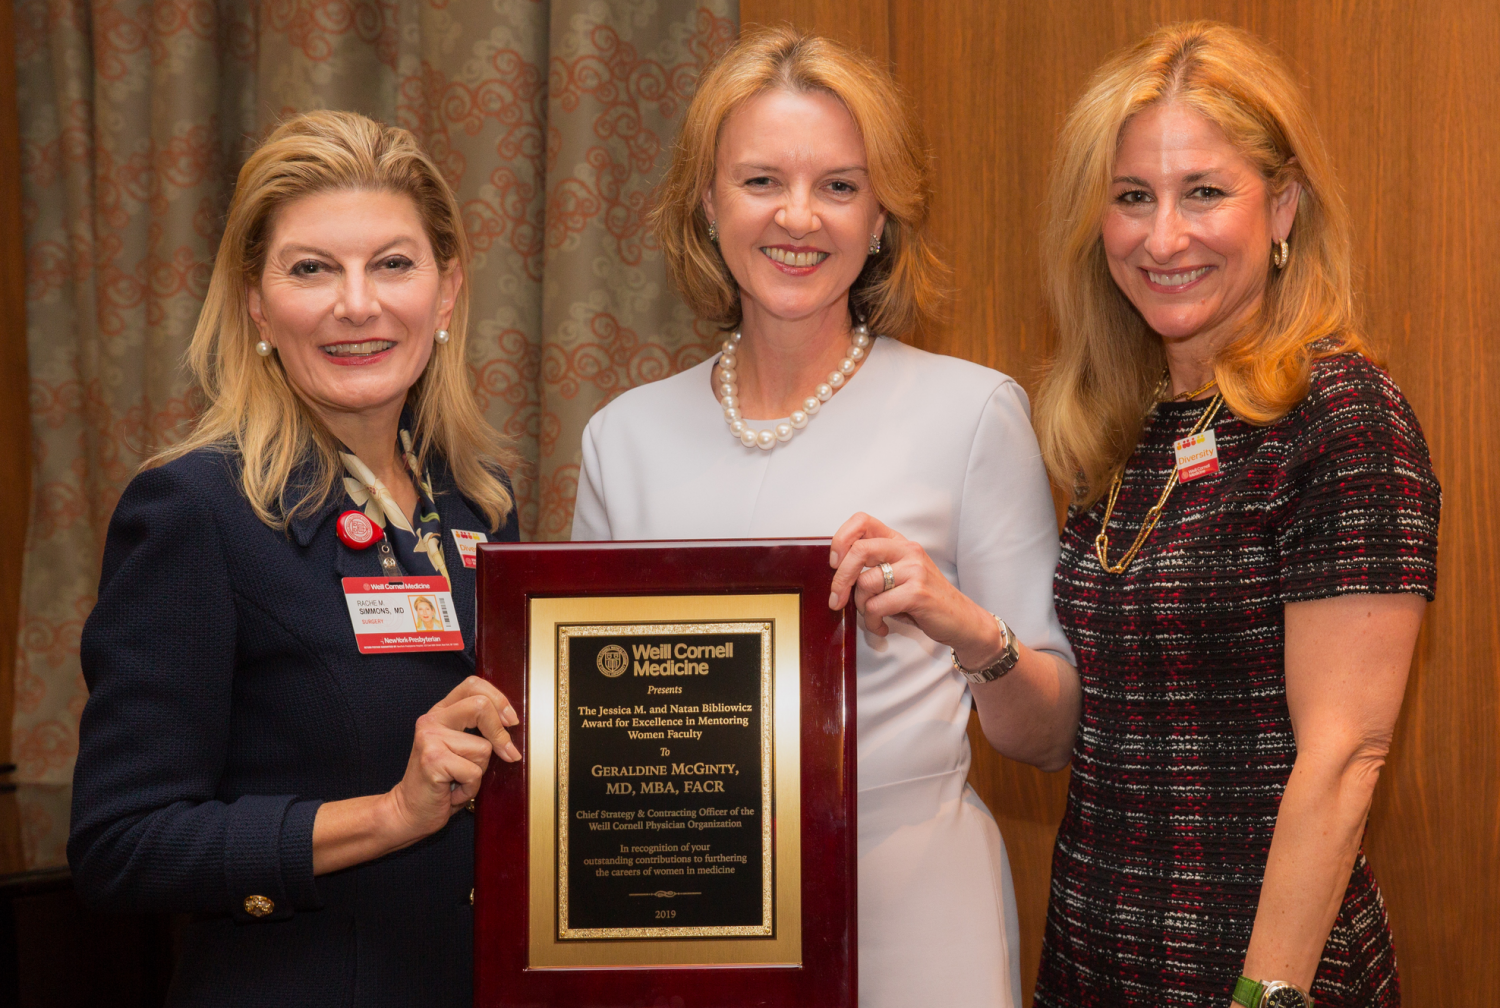 Dr. Geraldine McGinty accepts the 2019 Jessica M. and Natan Bibliowicz Award for Excellence in Mentoring Women Faculty from Jessica Bibliowicz and Dr. Rache Simmons. Credit: Ashley Jones